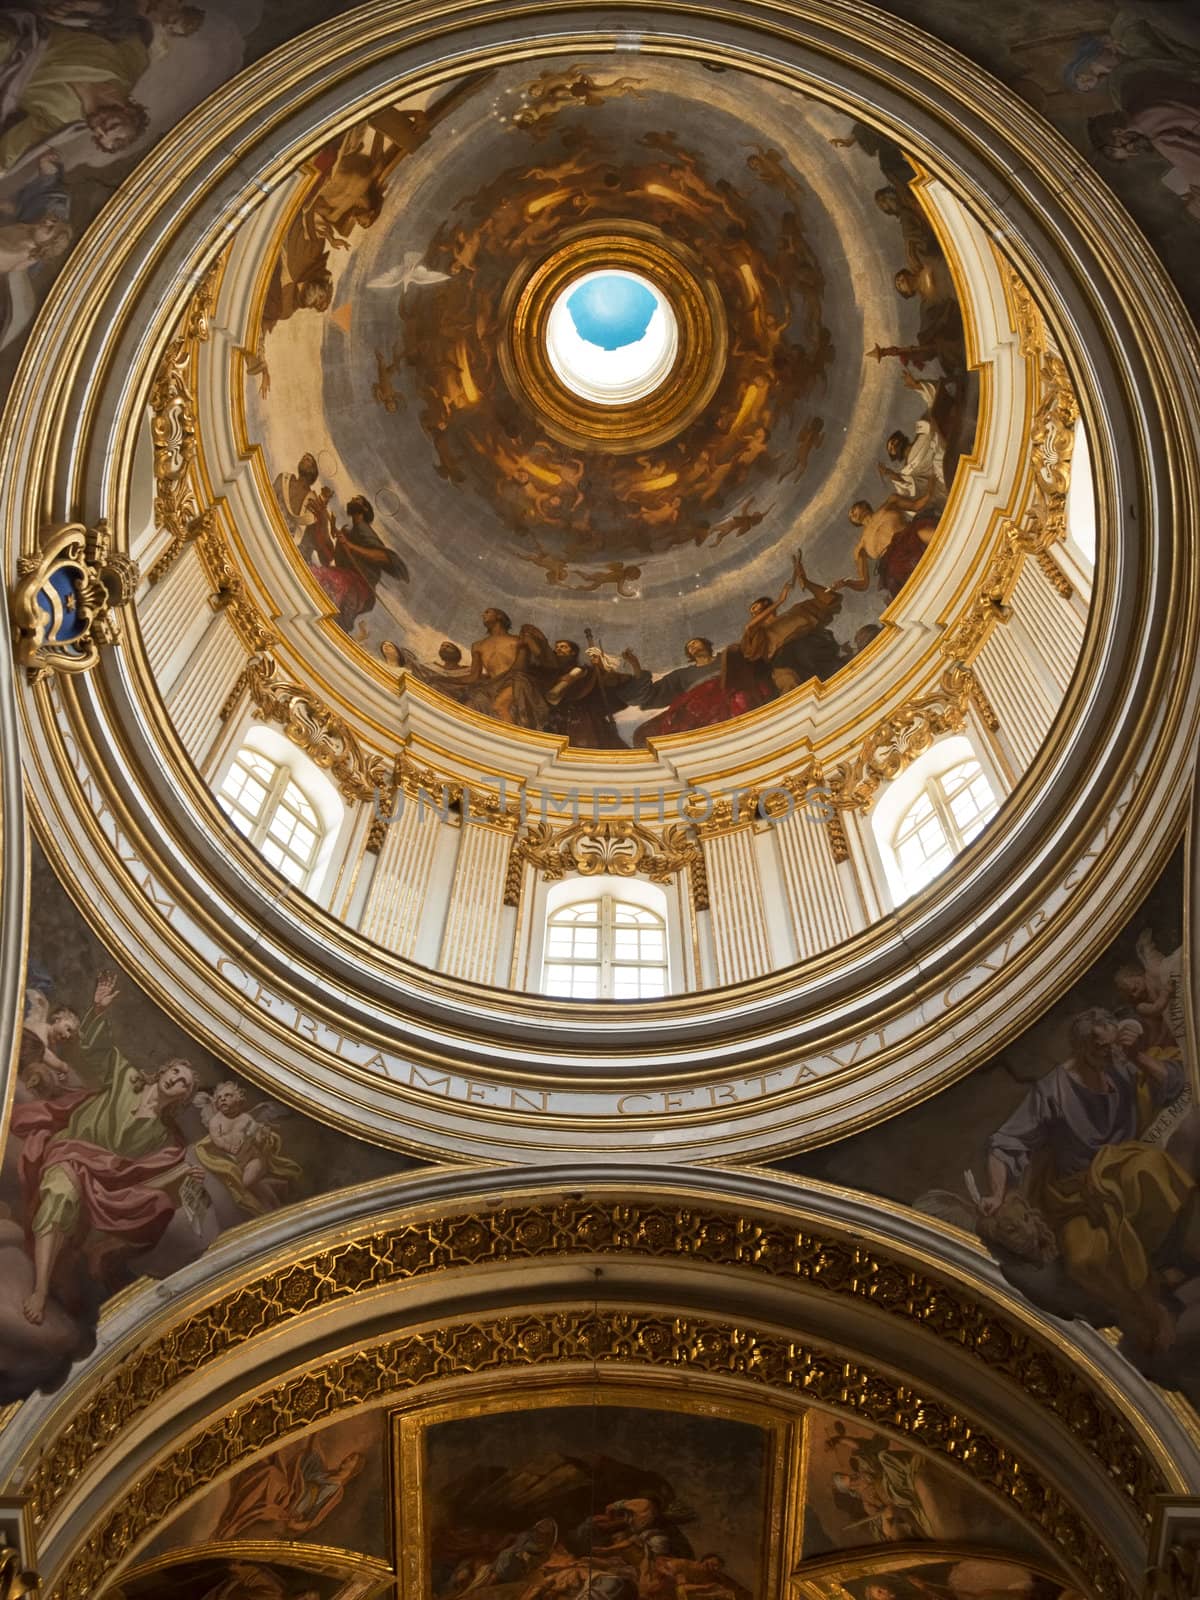 The majestic and beautiful interior of the dome at Cathedral of St. Paul in Mdina in Malta